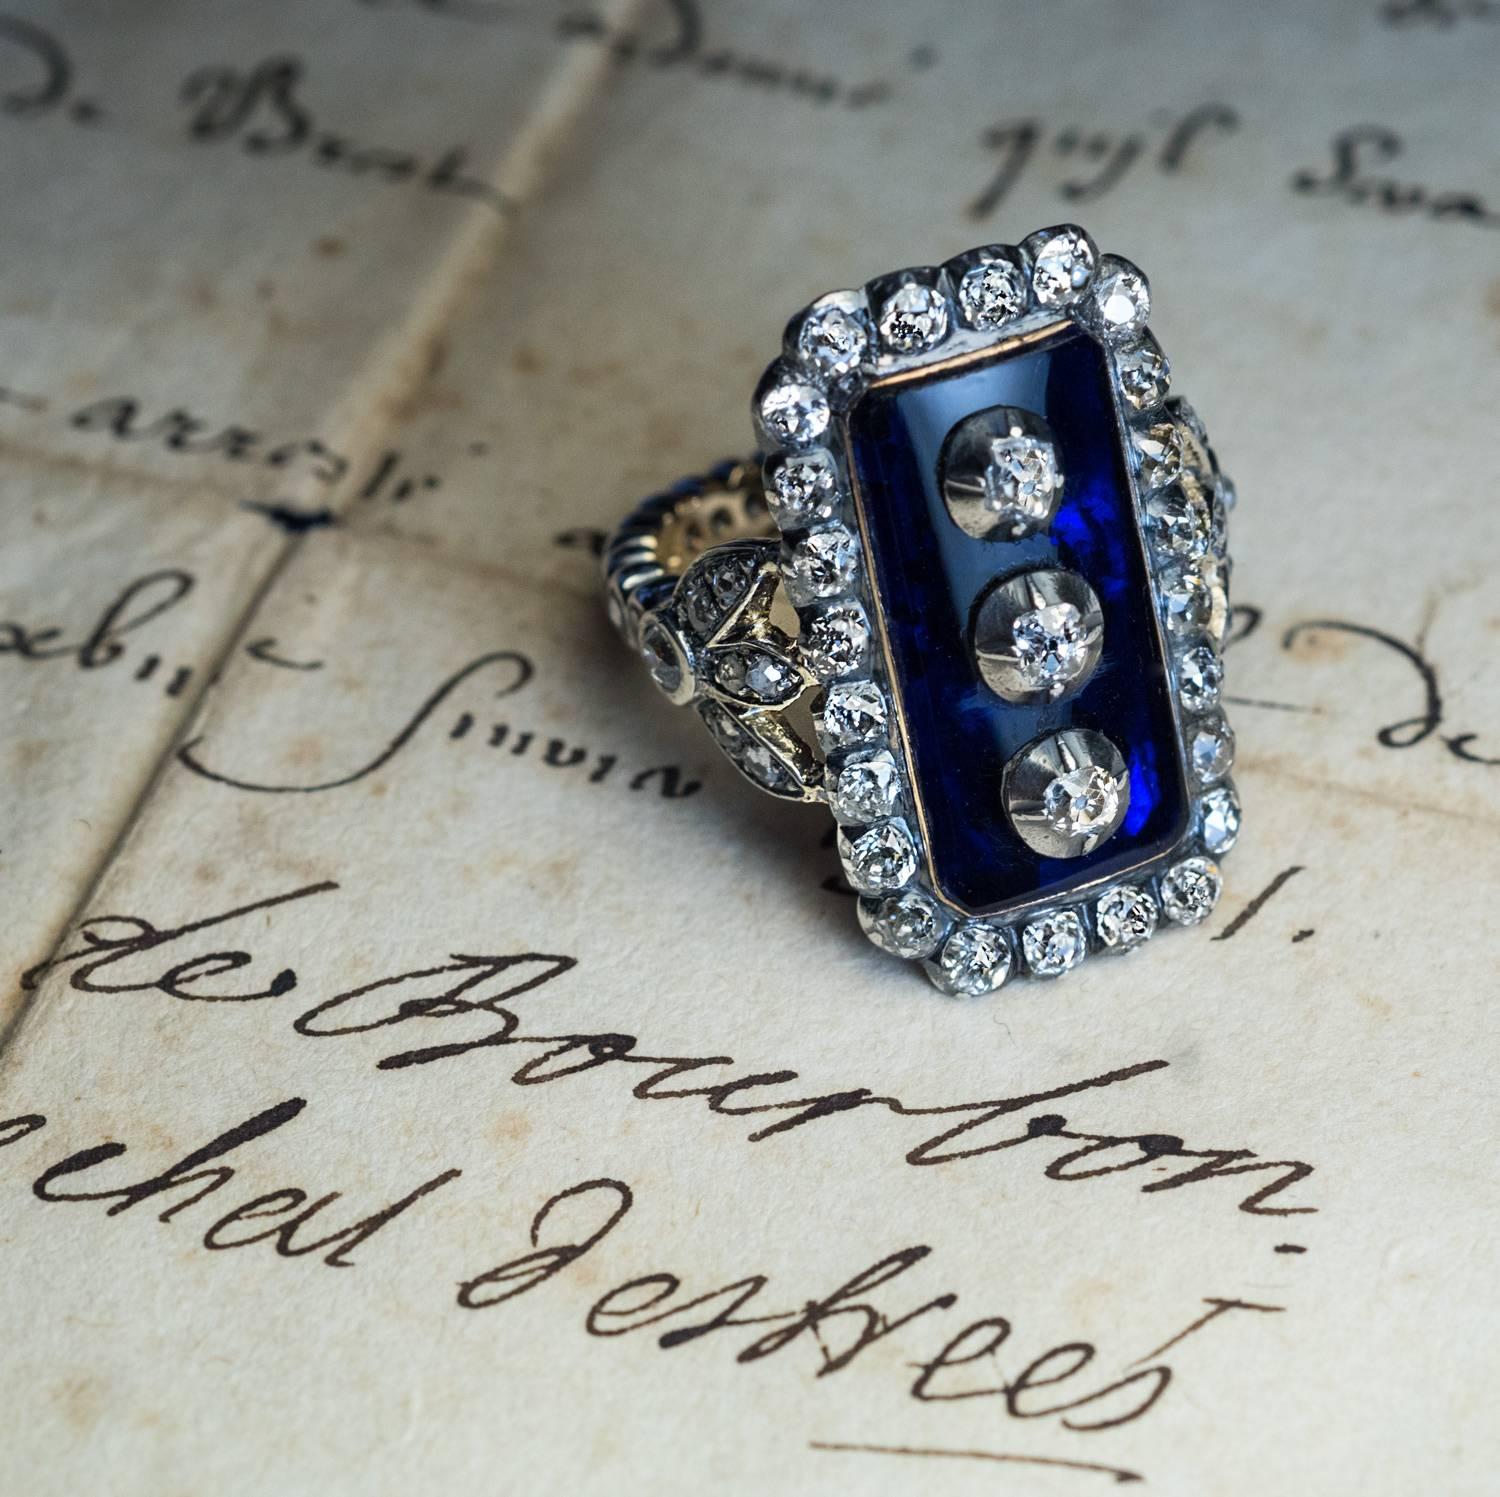 This impressive late 18th century, circa 1790, silver-topped gold ring is vertically set with a large cobalt blue glass plaque centered with three old cut diamonds set in silver cut down settings. The glass plaque is framed by 24 chunky old mine cut